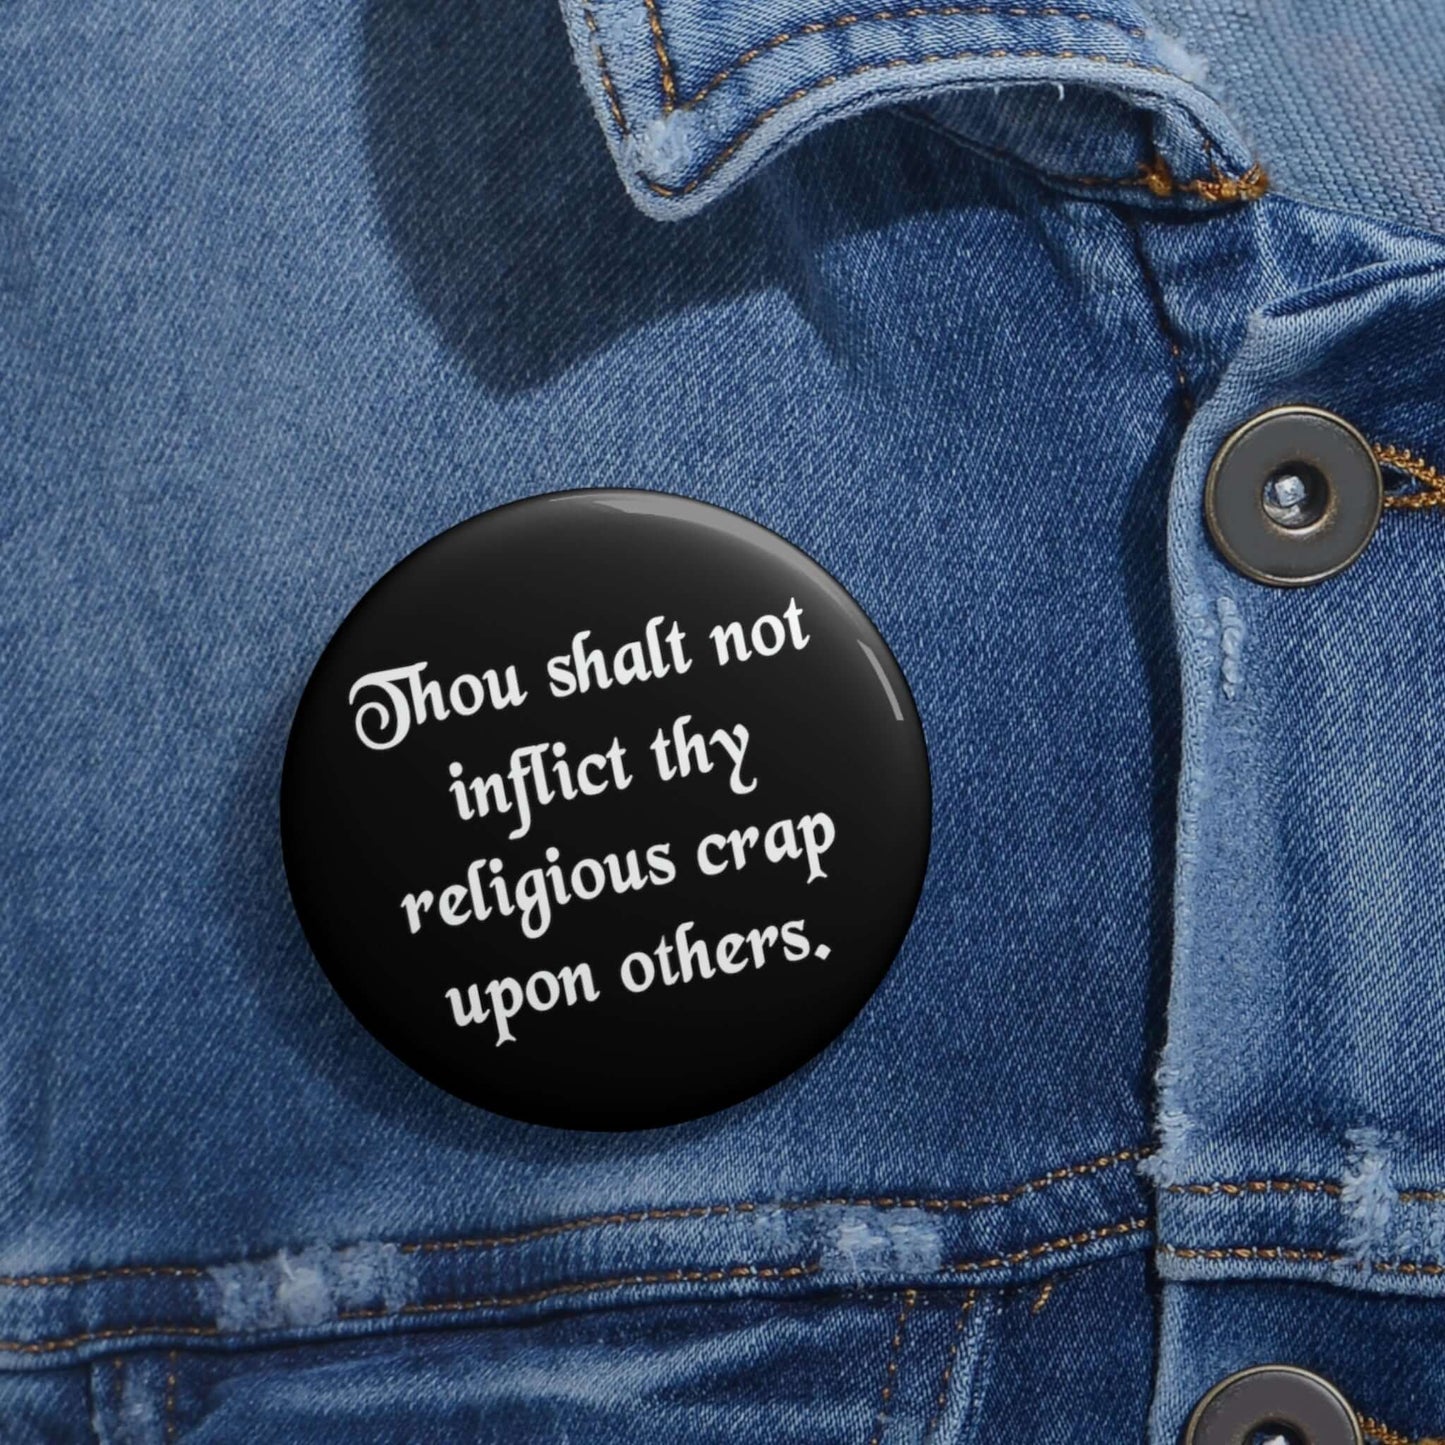 Thou shalt not inflict thy religious crap upon others pinback button